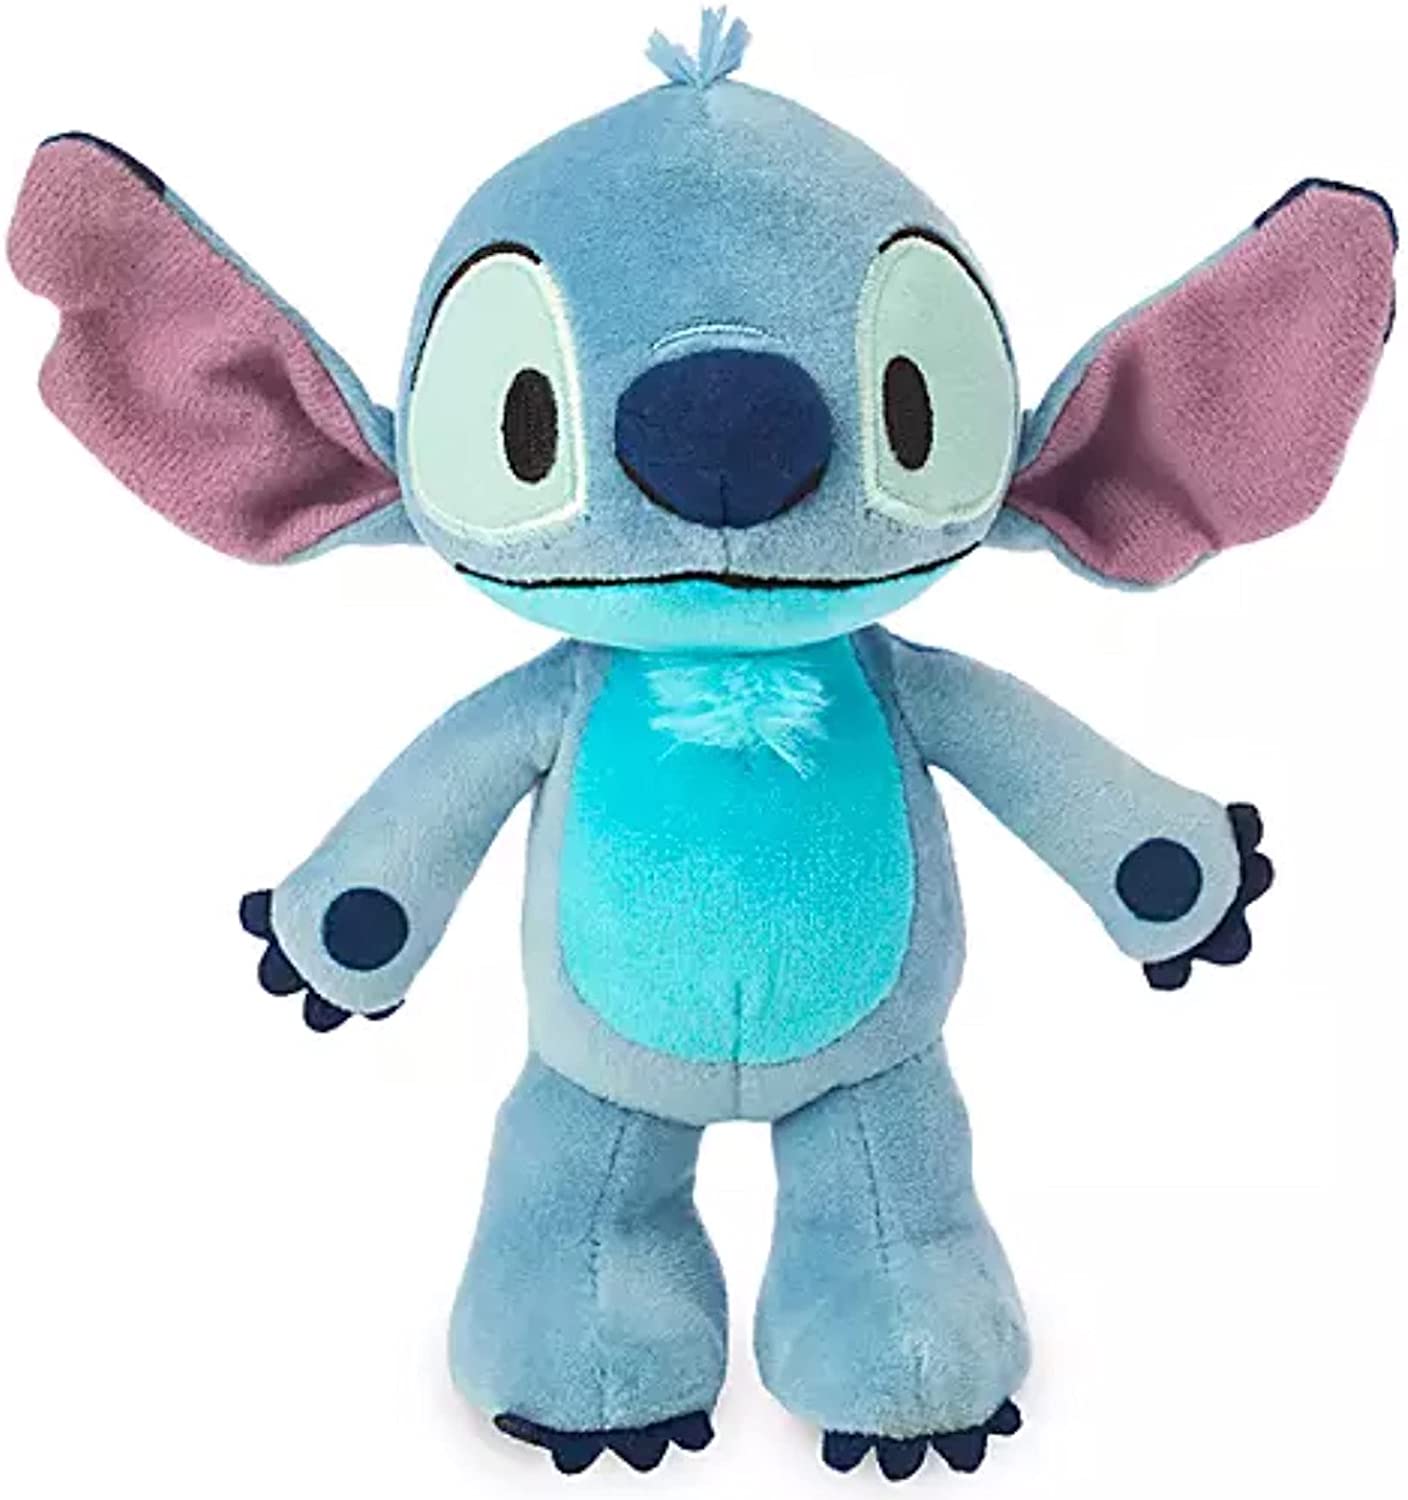 Sally 6.5 Inch Disney Parks Exclusive nuiMOs Poseable Plush Collectible Figure 